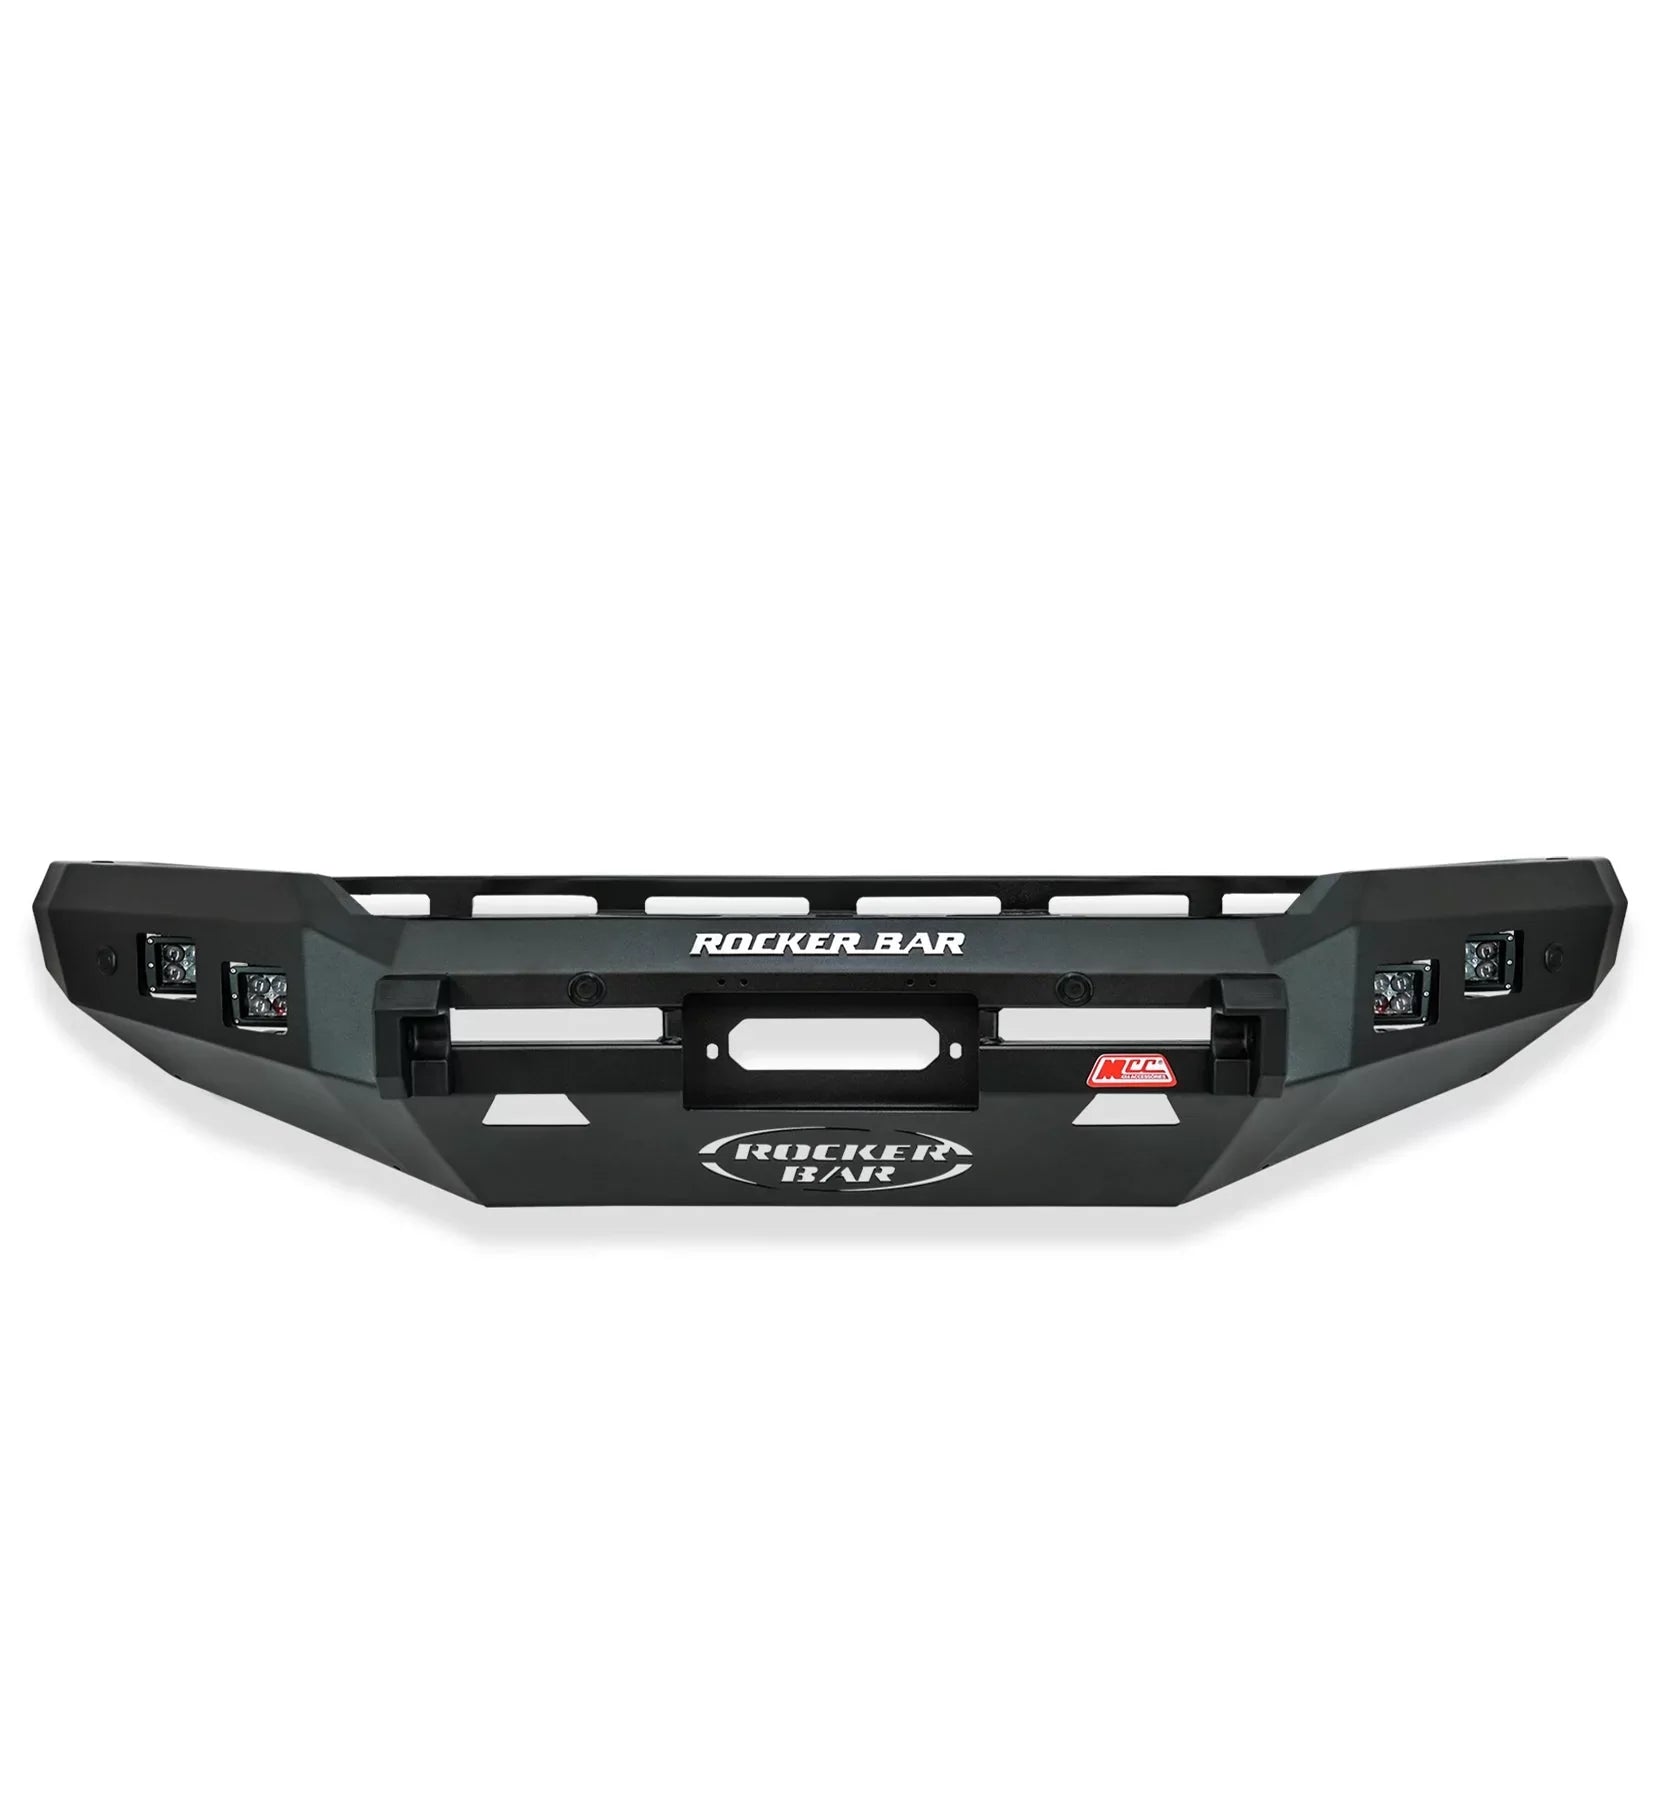 Bt50 07-11 078-01sq Rocker Front Bar Square Light No Loop + Bracket + Underprotection Plate If Available